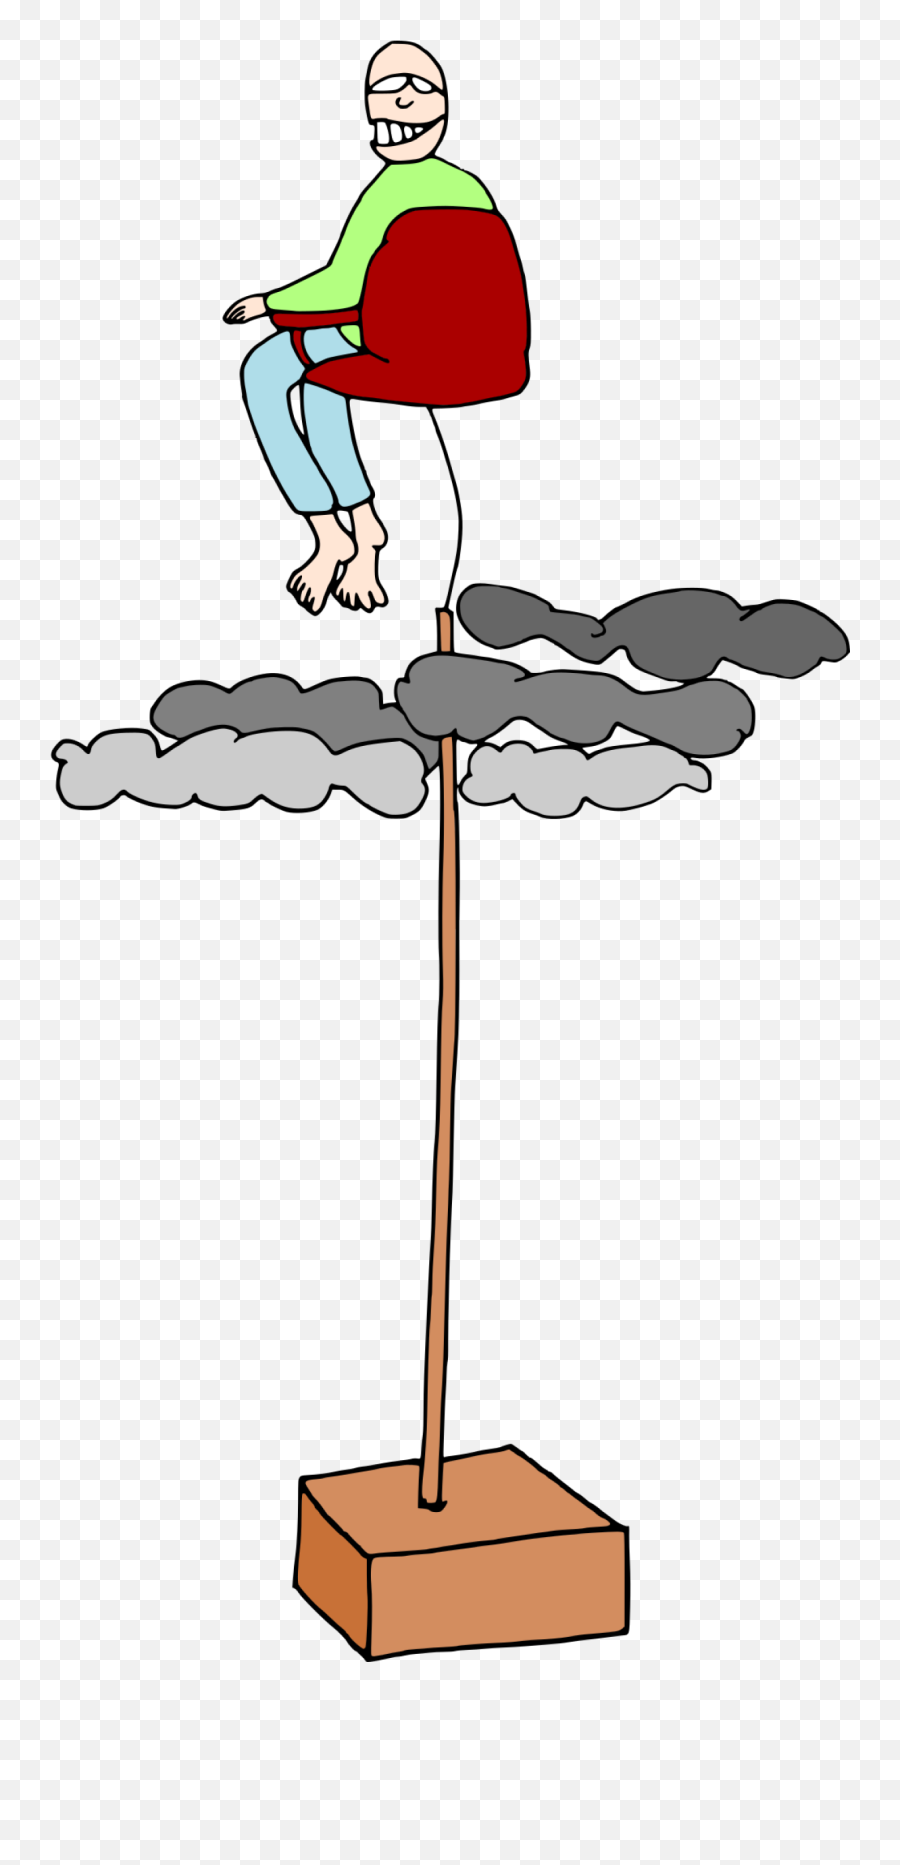 Clouds Png Clip Arts For Web - Clip Arts Free Png Backgrounds Cartoon,Clouds Png Cartoon